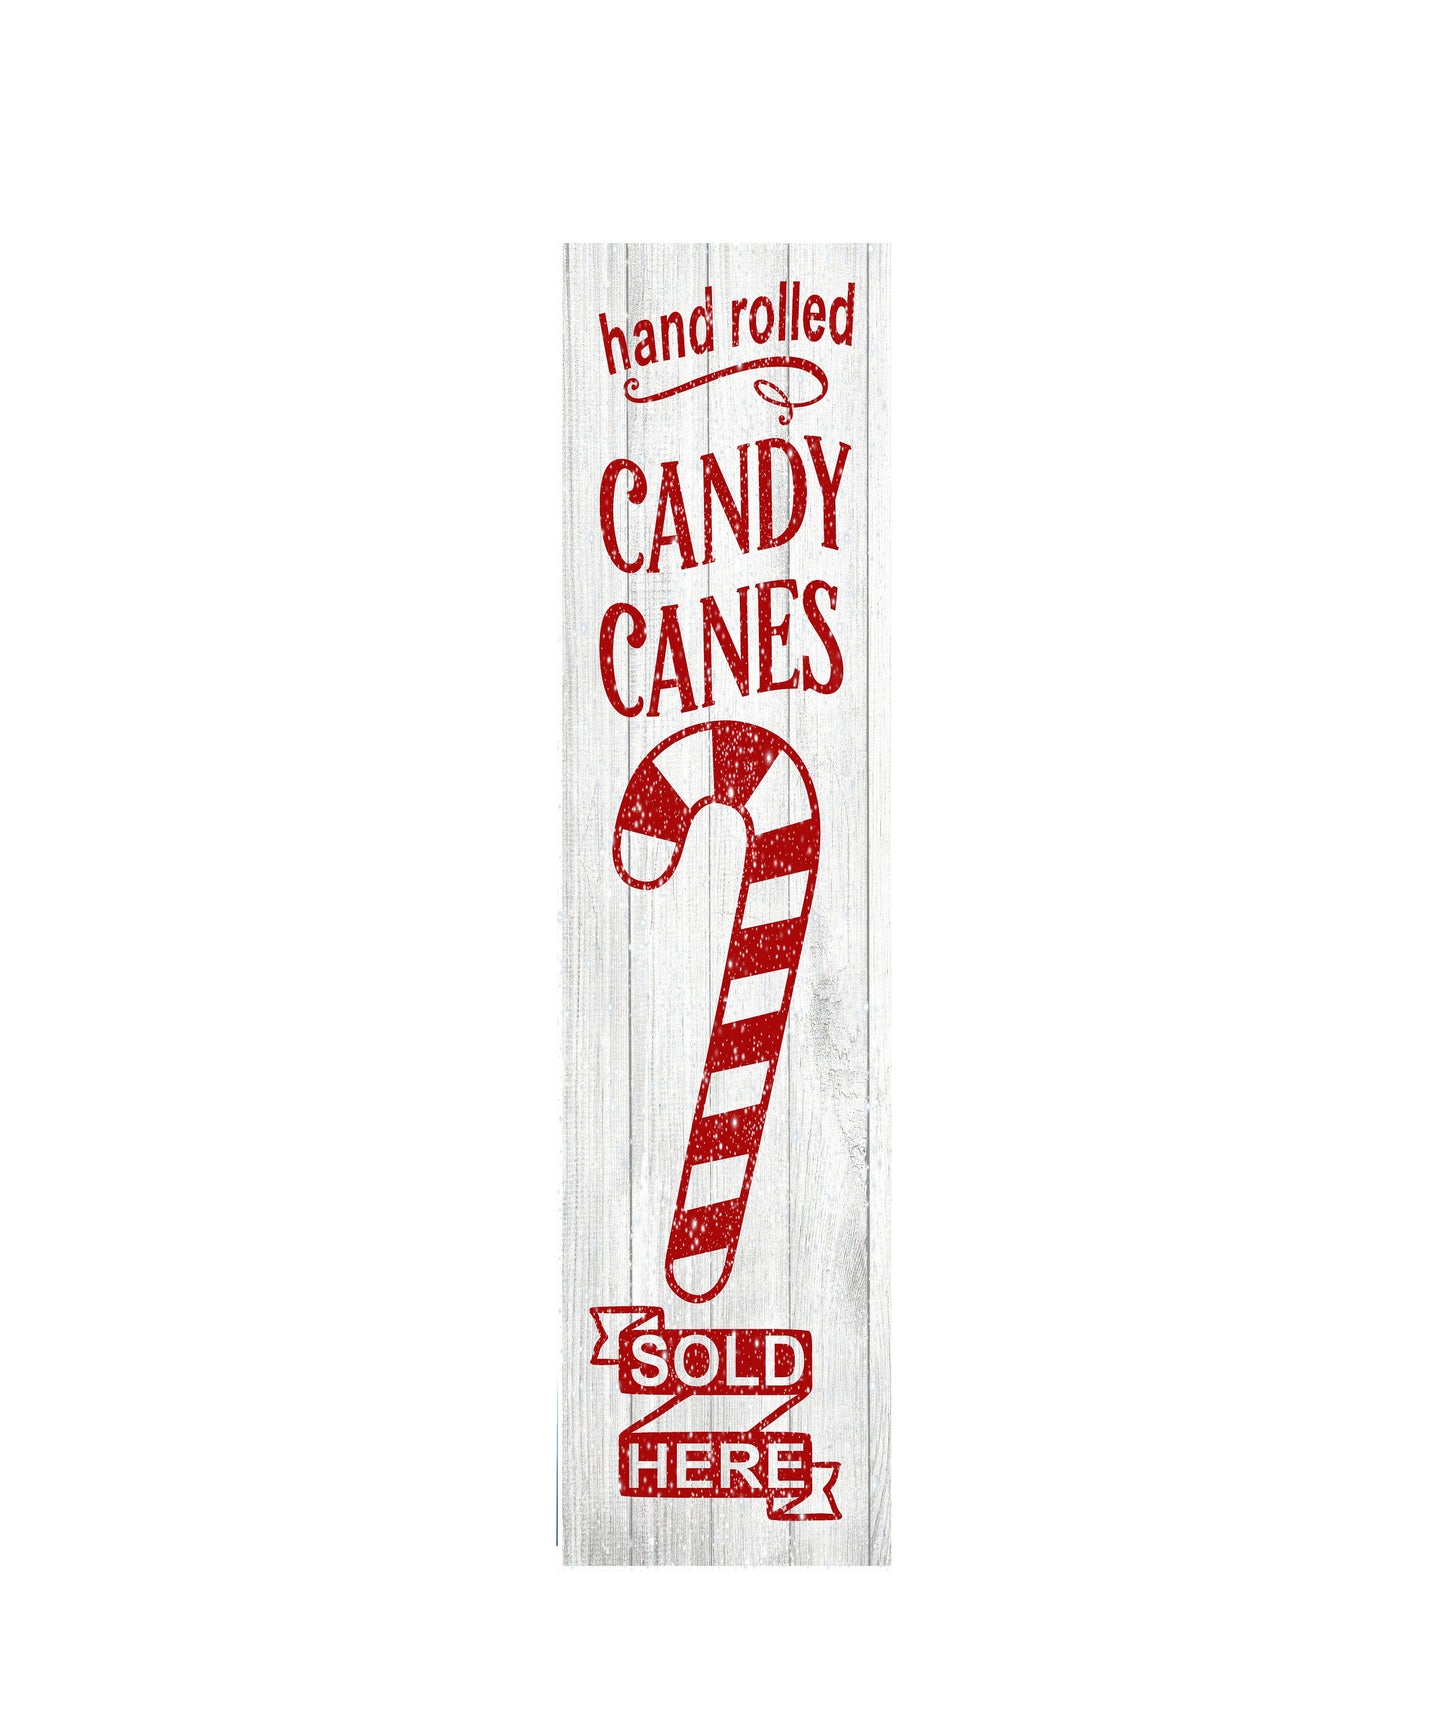 24 Inch Candy Canes Sold Here Christmas Vertical Wood Print Sign